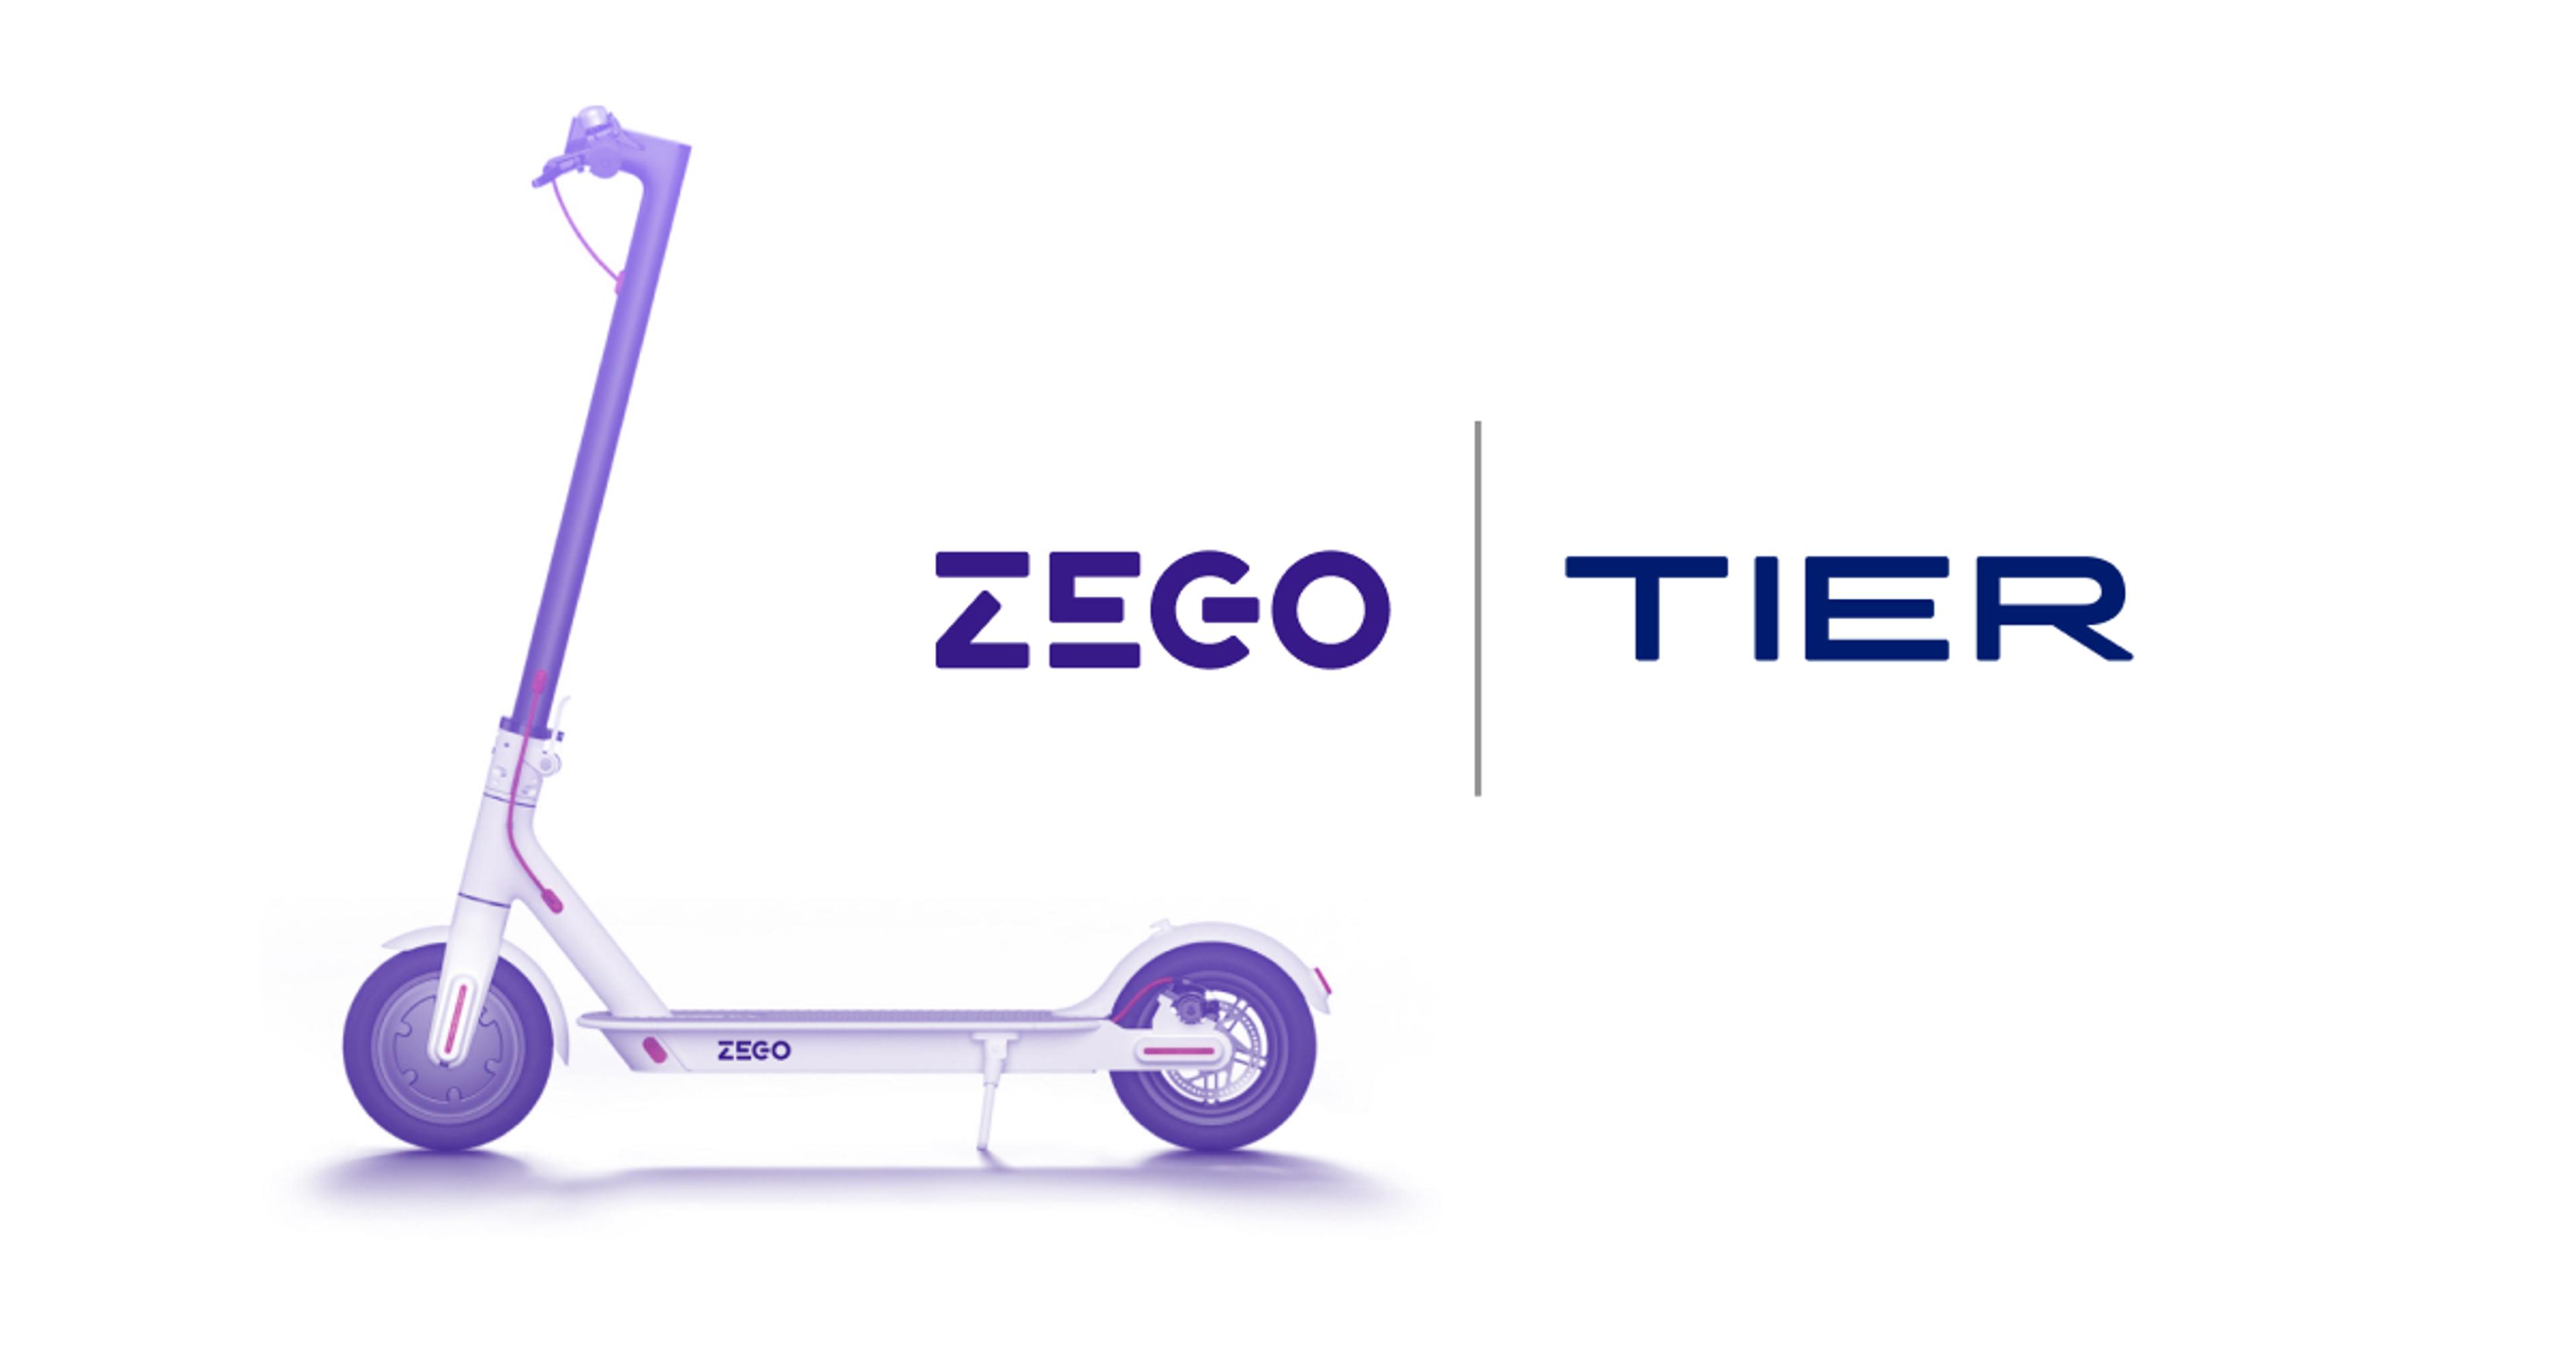 Zego partners with European e-scooter company TIER